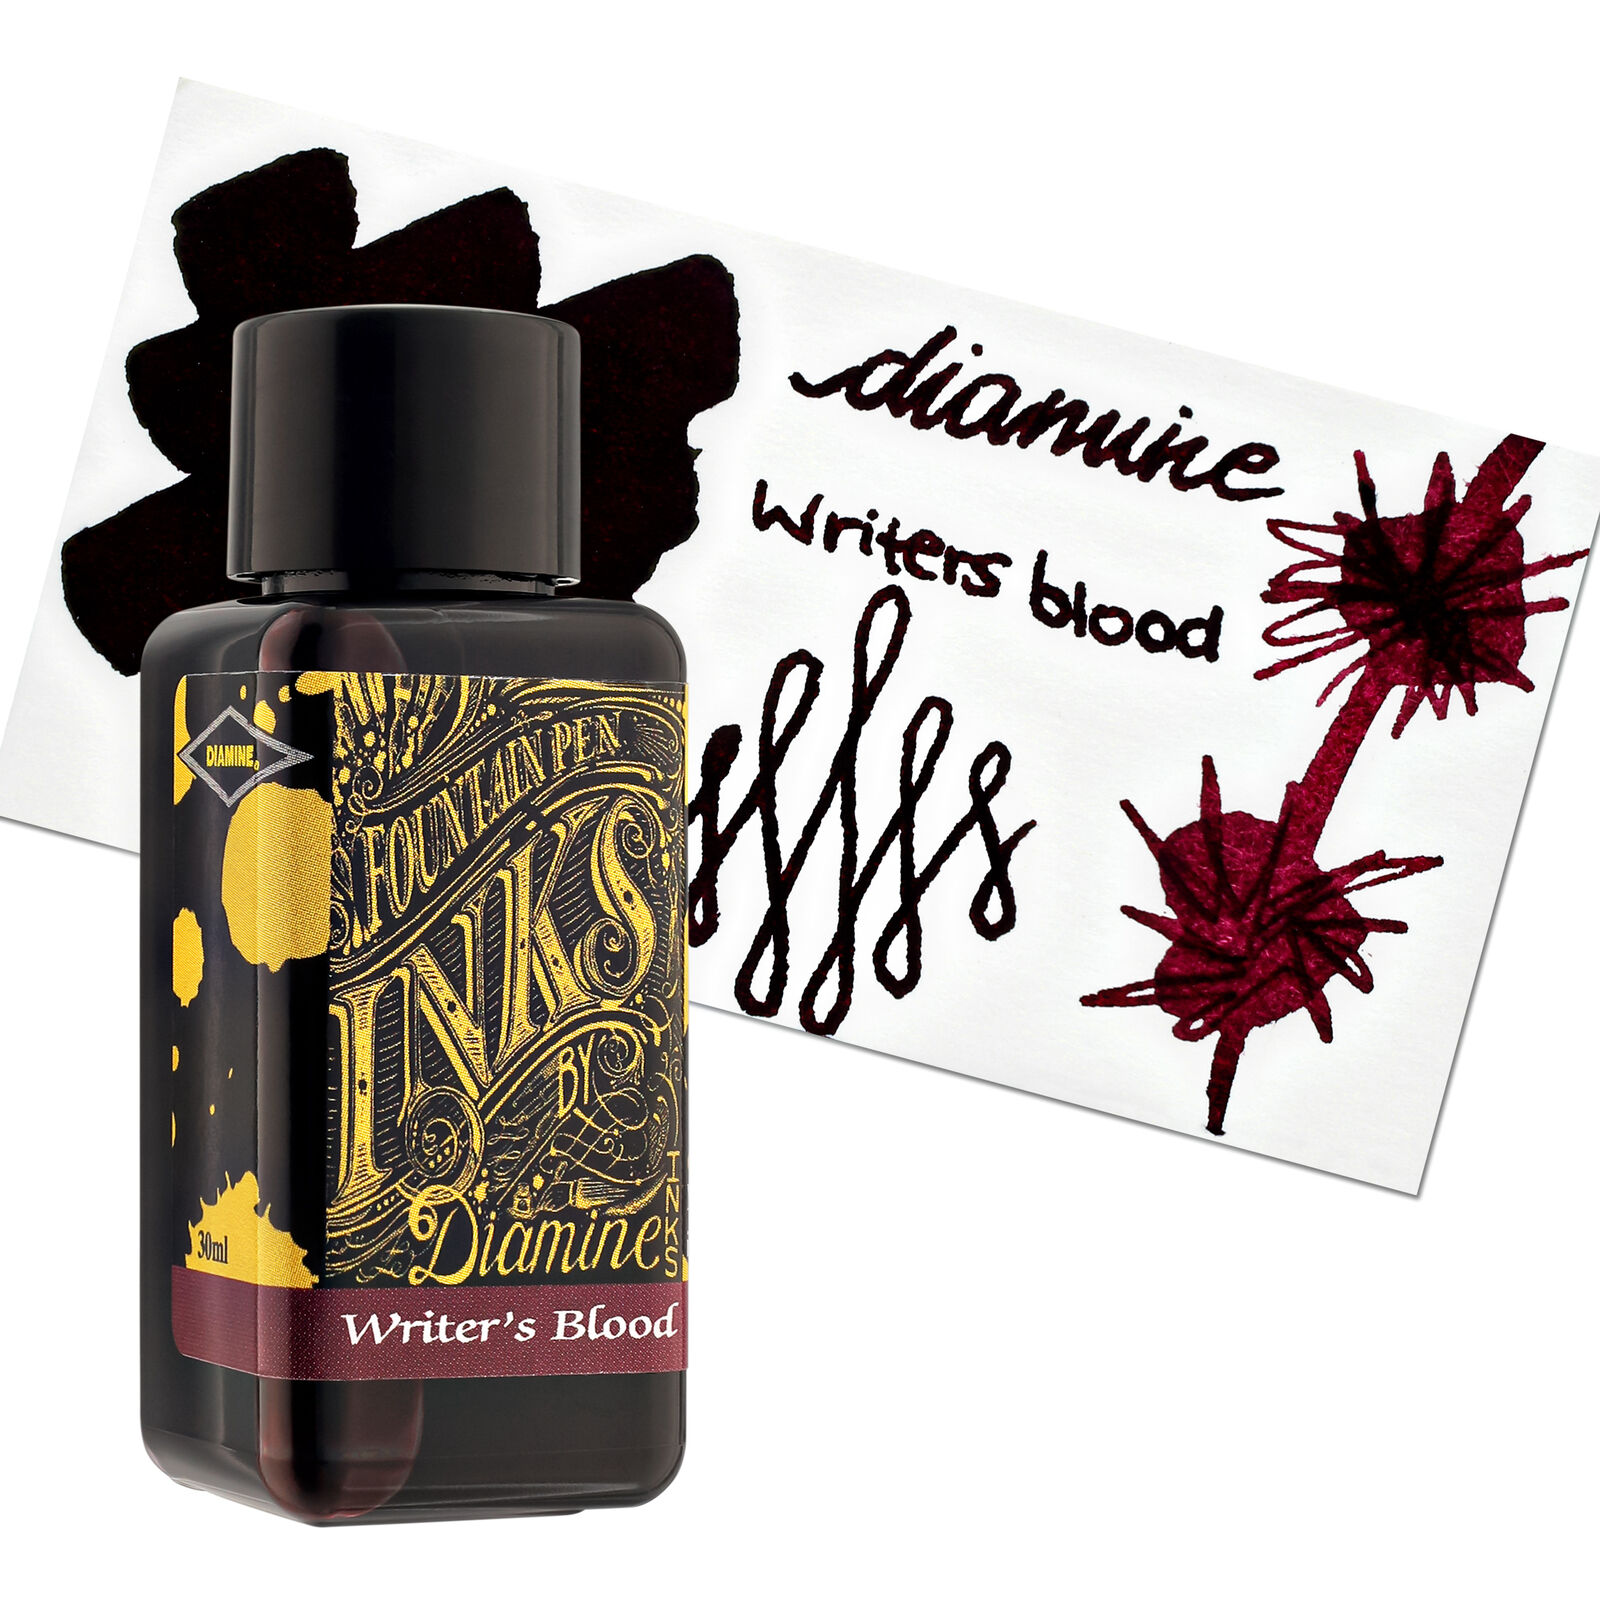 Diamine Classic Bottled Ink for Fountain Pens in Writer's Blood - 30 mL - NEW